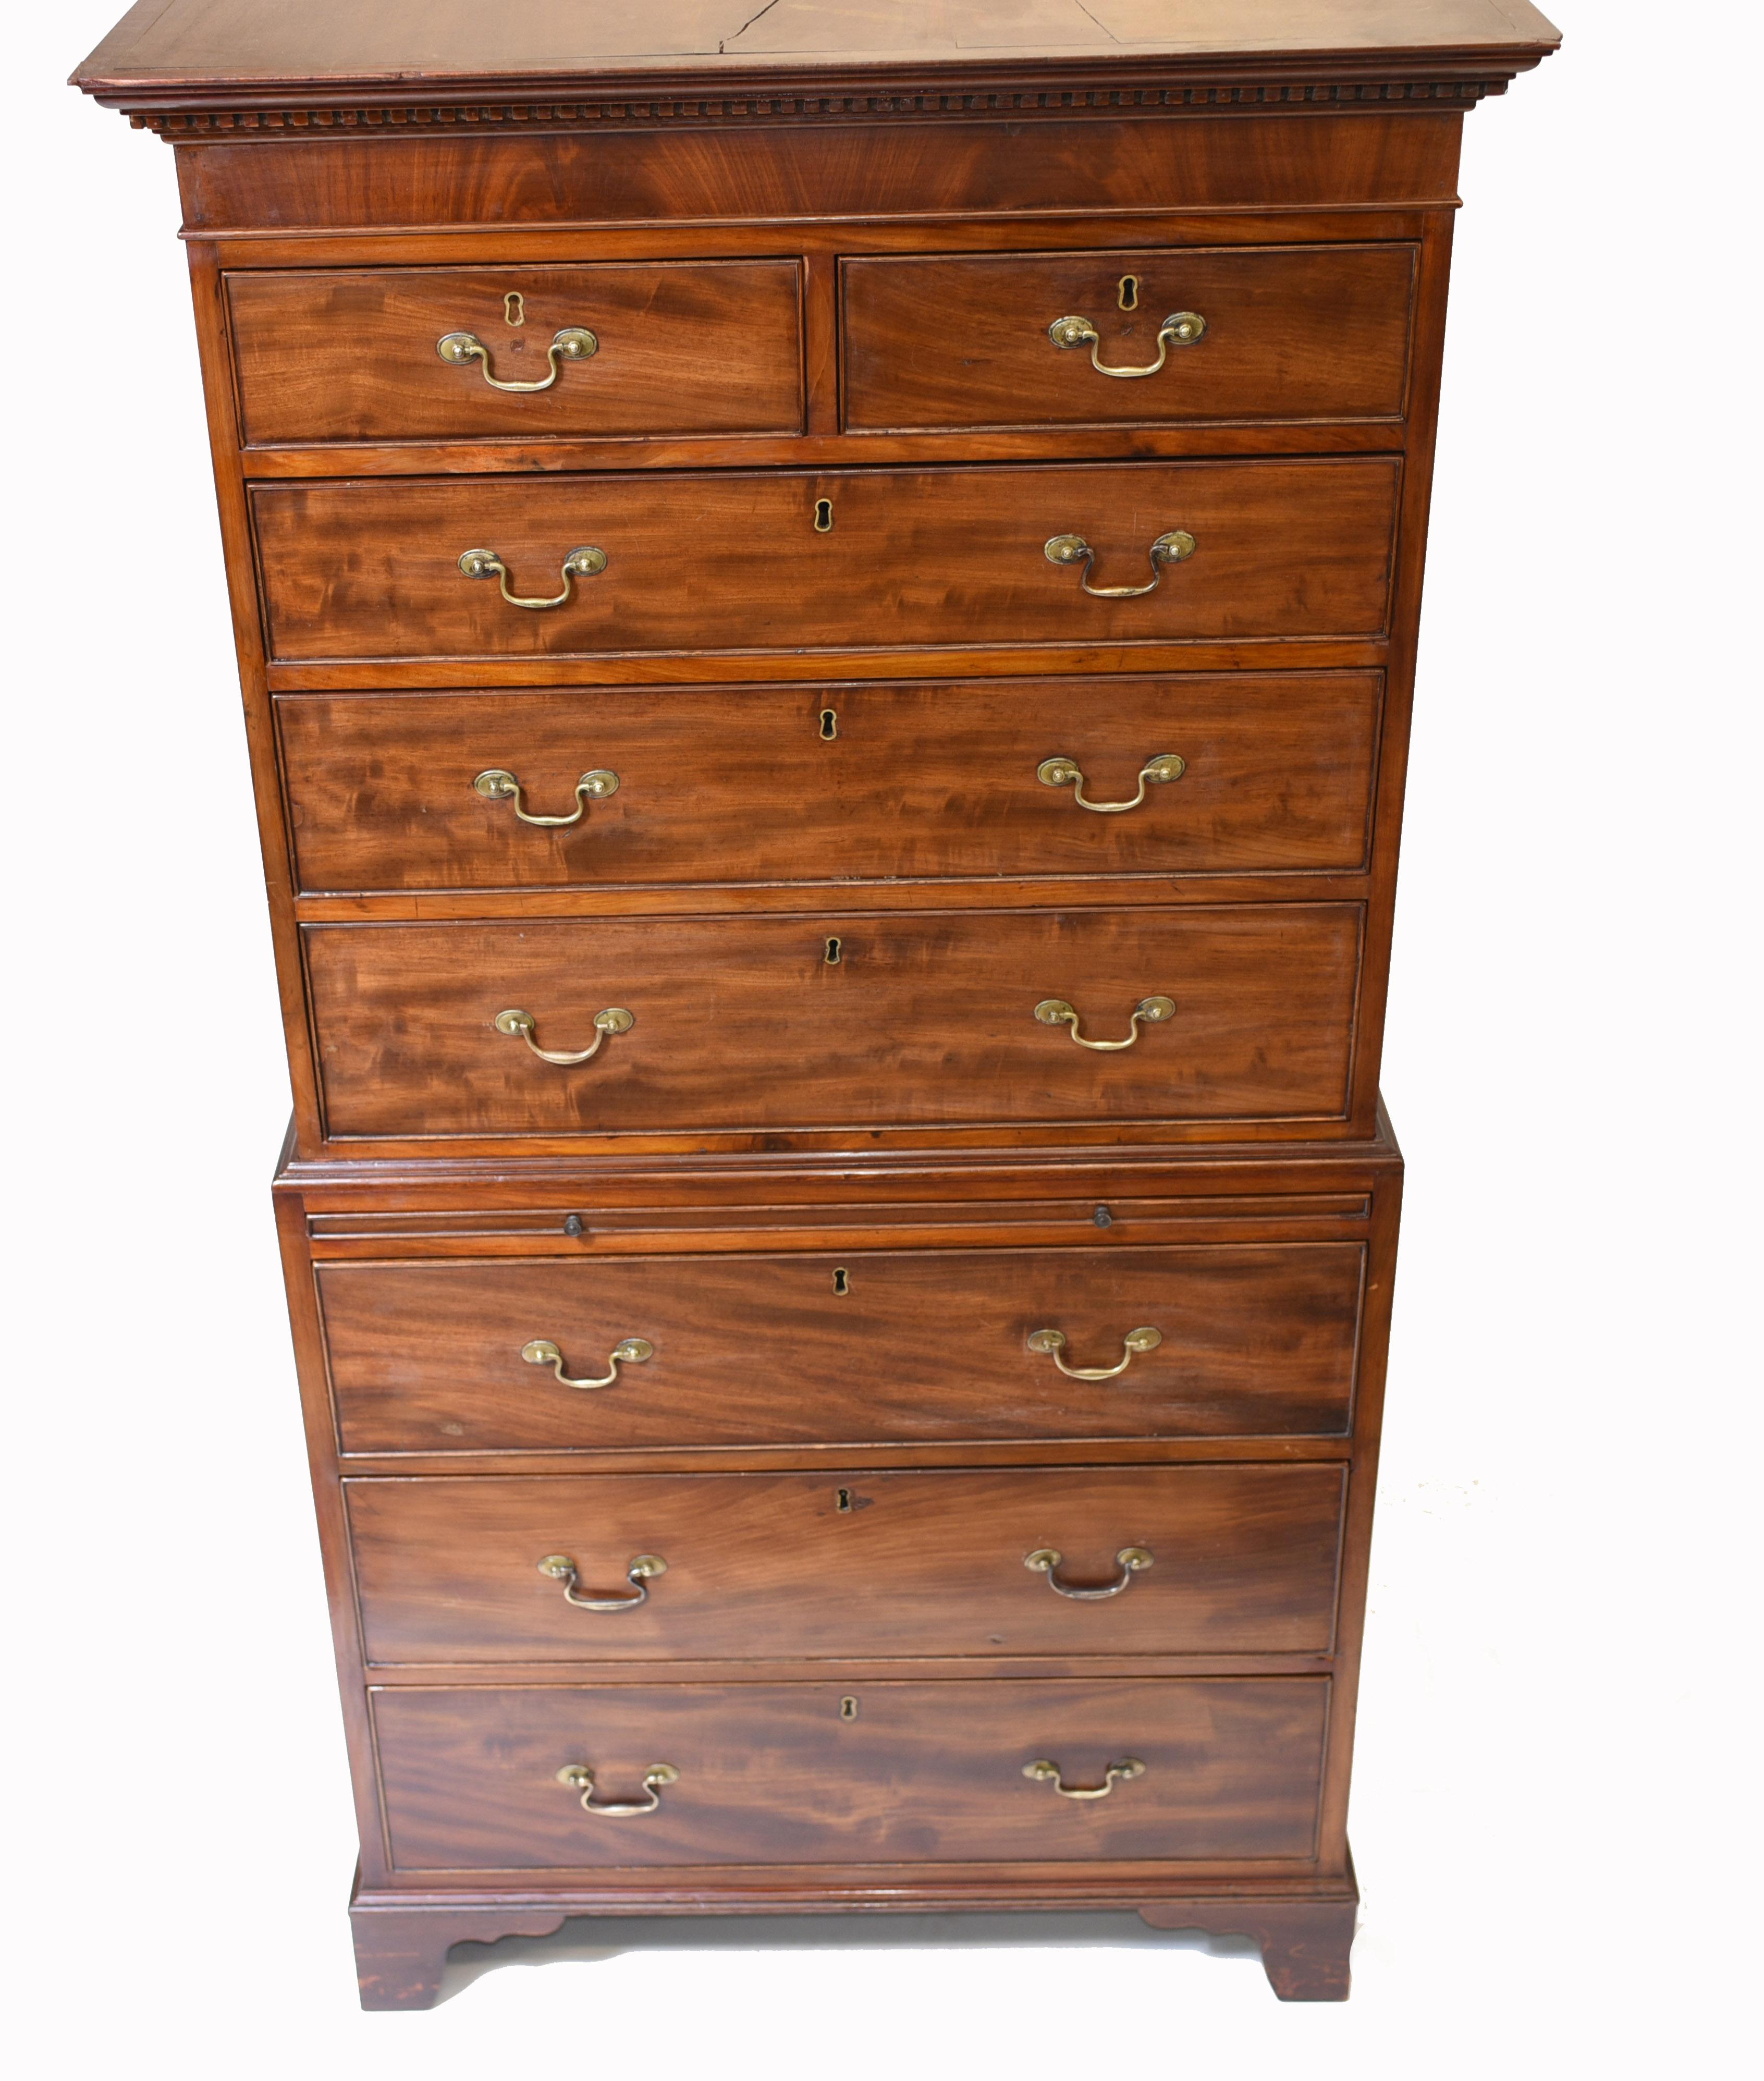 Wonderful Georgian chest on chest in mahogany
Clean and minimal design classic Georgian aesthetic
Will work well in modern interiors
Lots of storate with eight drawers
We date this to circa 1820
Viewings available by appointment
Offered in